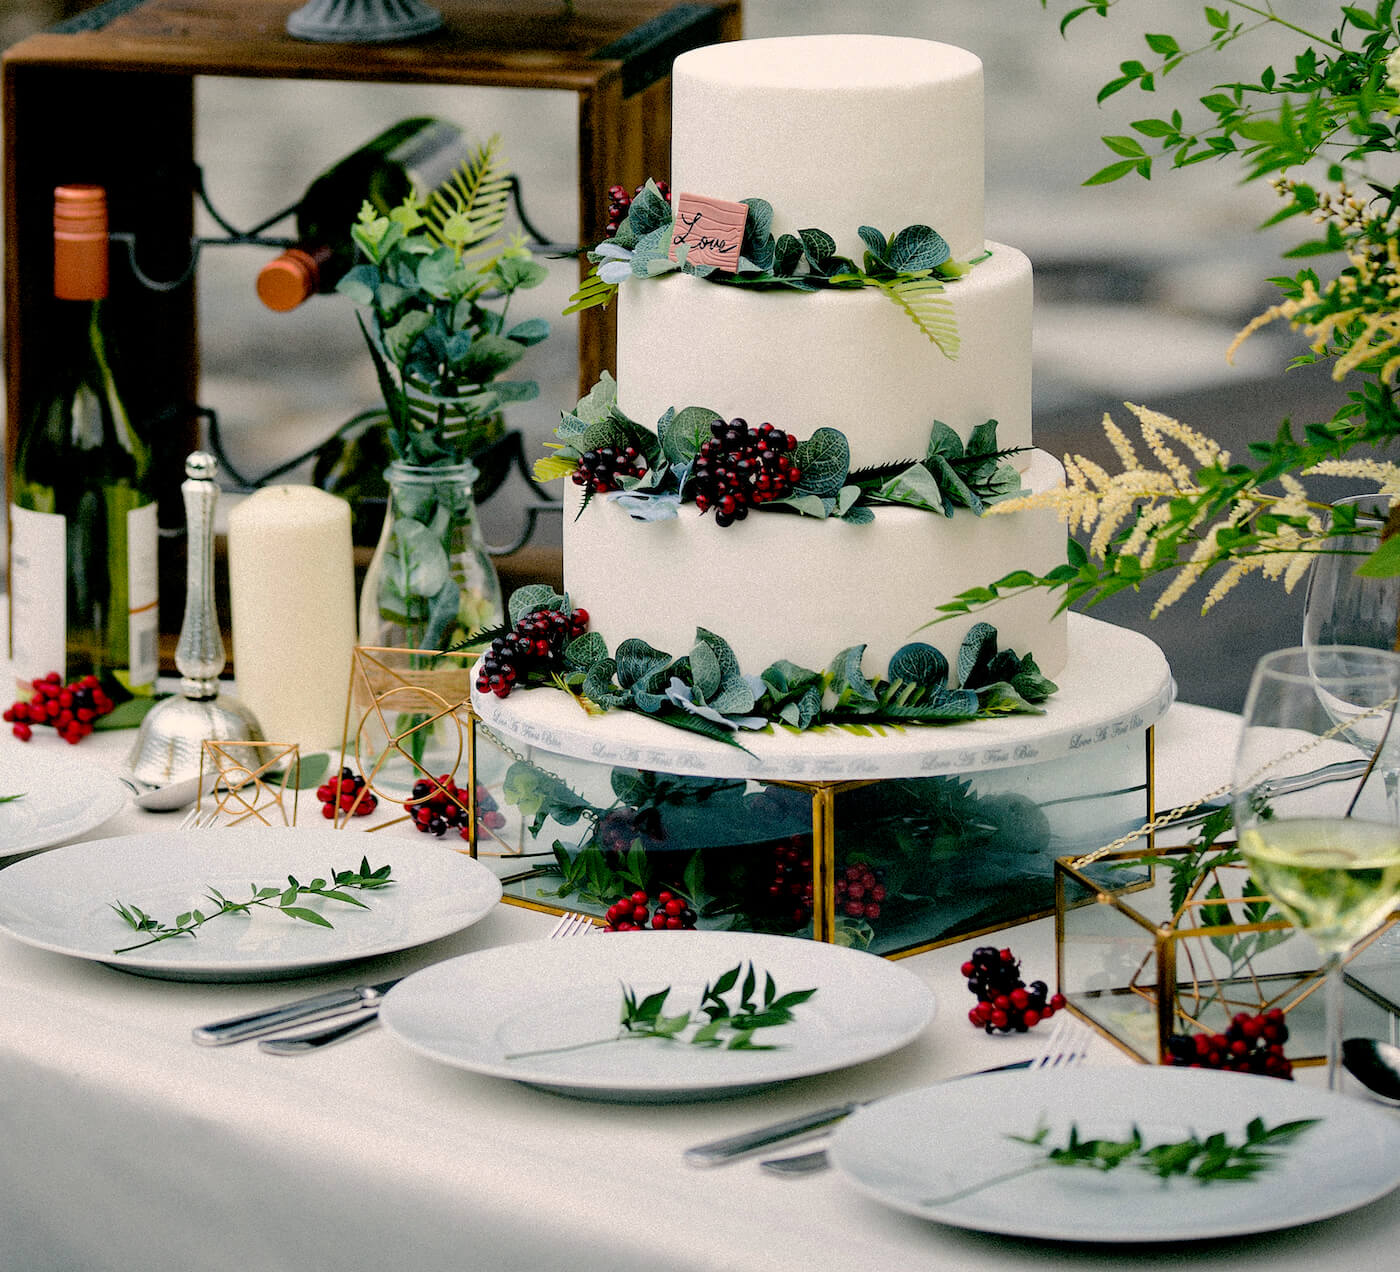 Wedding cake for a mixed marriage led by a rabbi in Europe.